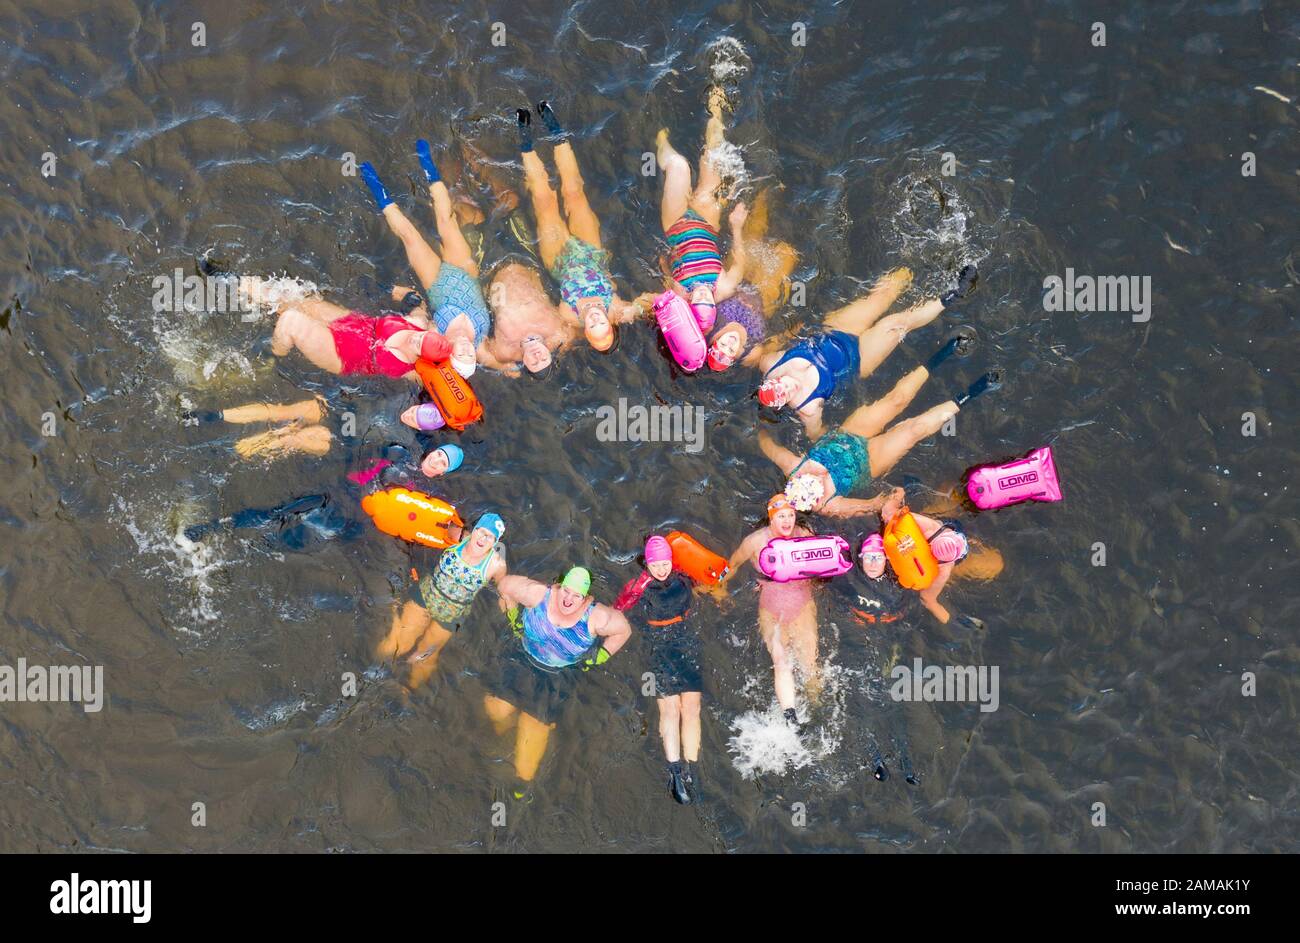 Callander, Scotland, UK. 12th Jan 2020. Drone images of open water swimmers from the Fife Wild Swimmers club take advantage of the cold but sunny weather to go swimming in Loch Lubnaig in The Trossachs, Stirlingshire. Apart from their usual swim they took time to have fun and practice some synchronised swimming moves before the cold forced them from the loch.  Iain Masterton/Alamy Live News Stock Photo